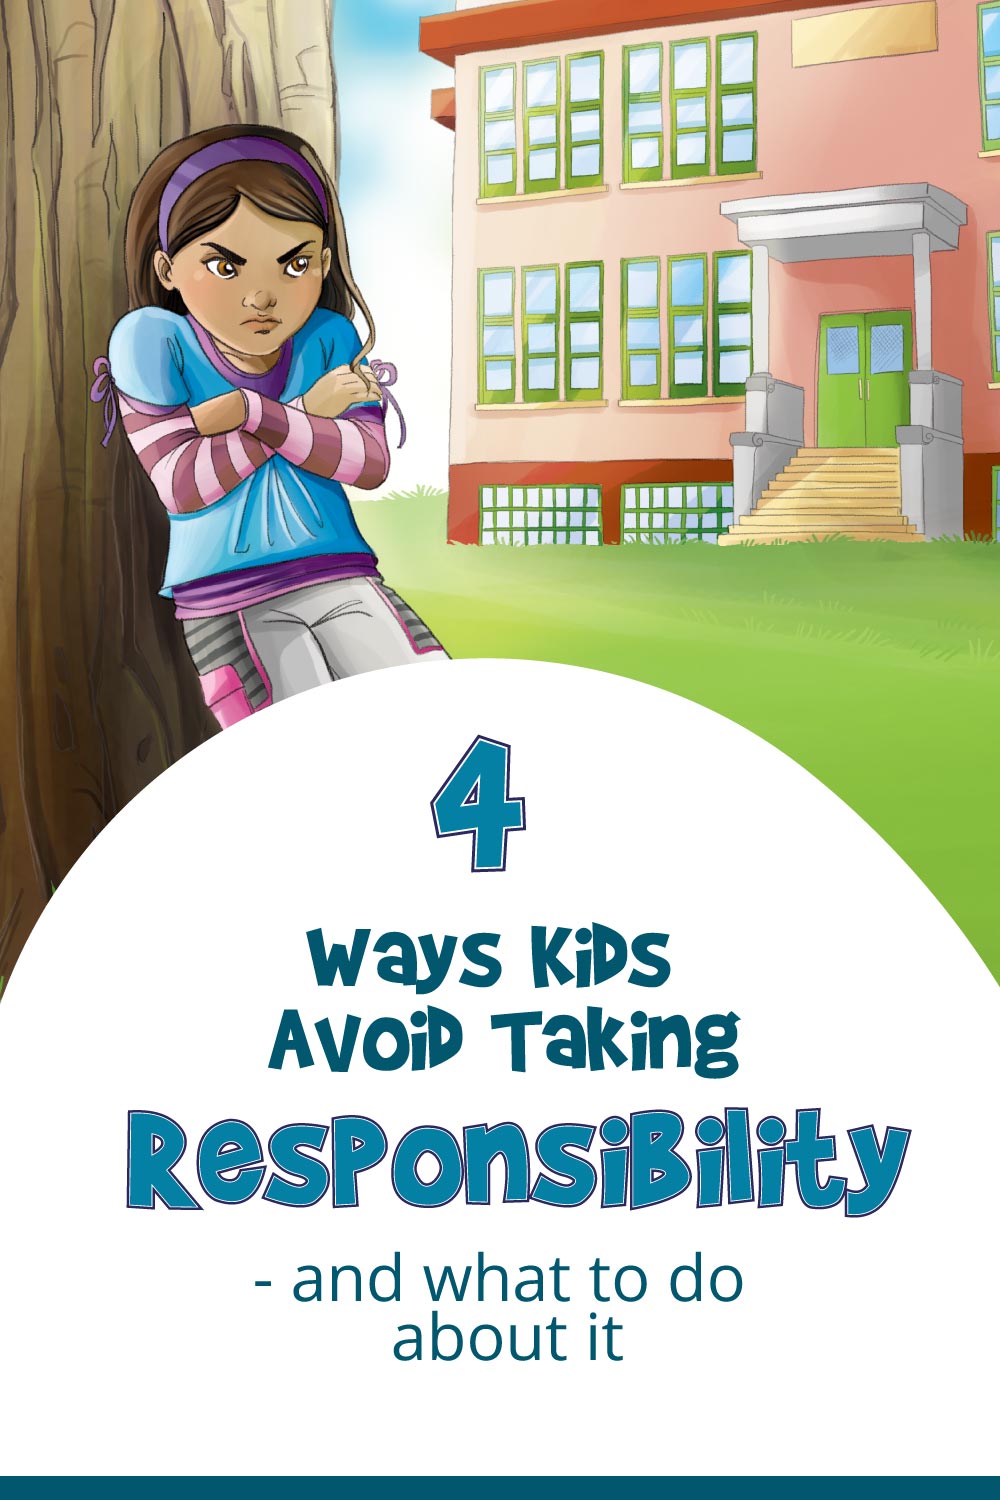 4 Ways Kids Avoid Taking Responsibility- Social Emotional Learning and Good Values Techniques